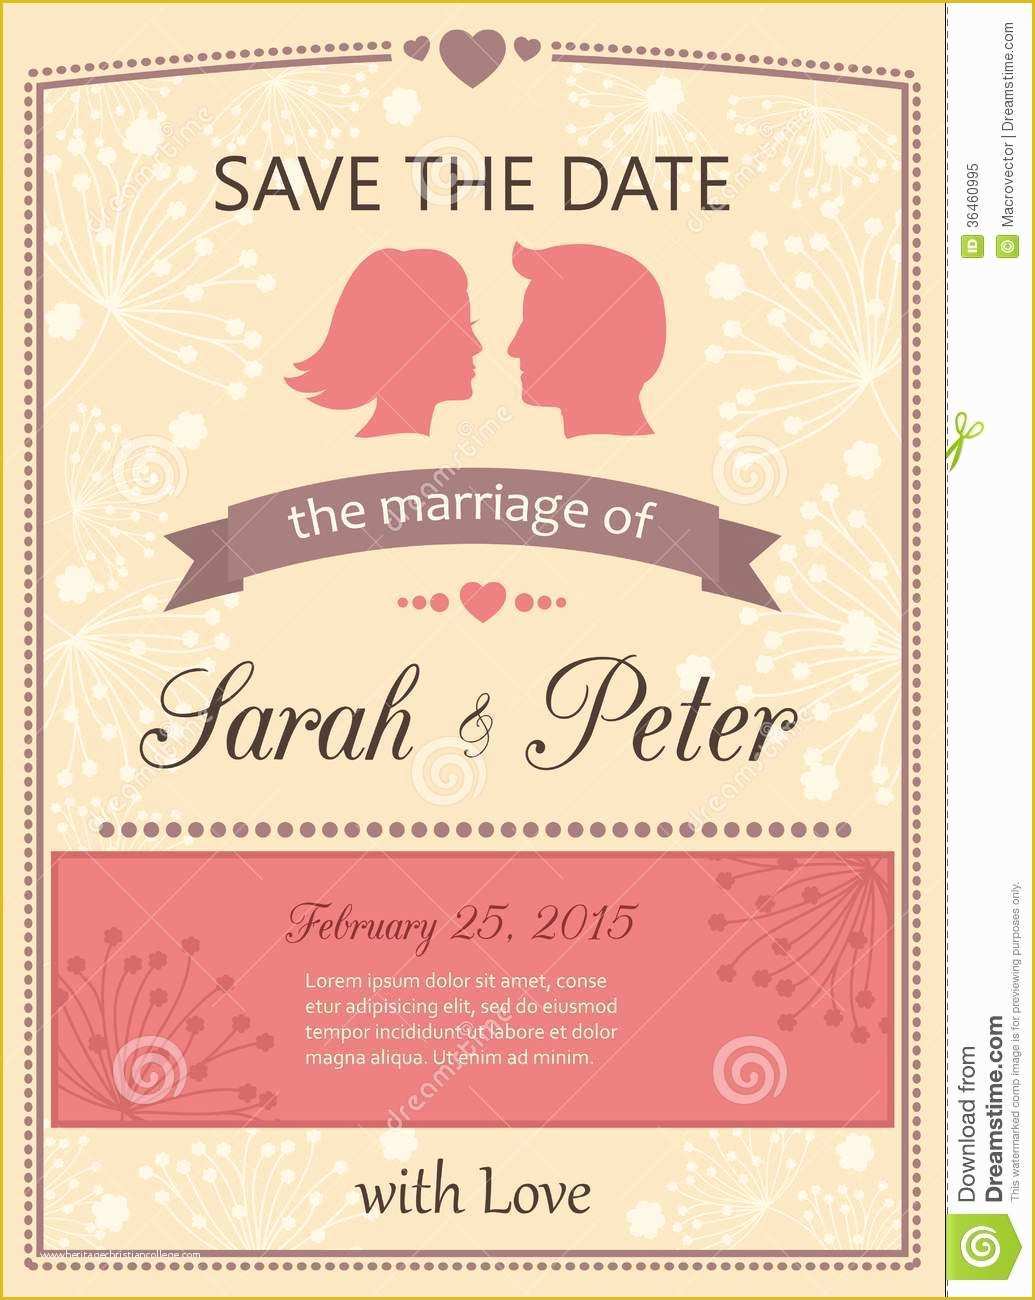 Save the Date Templates Free Online Of Save the Date Invitation Templates